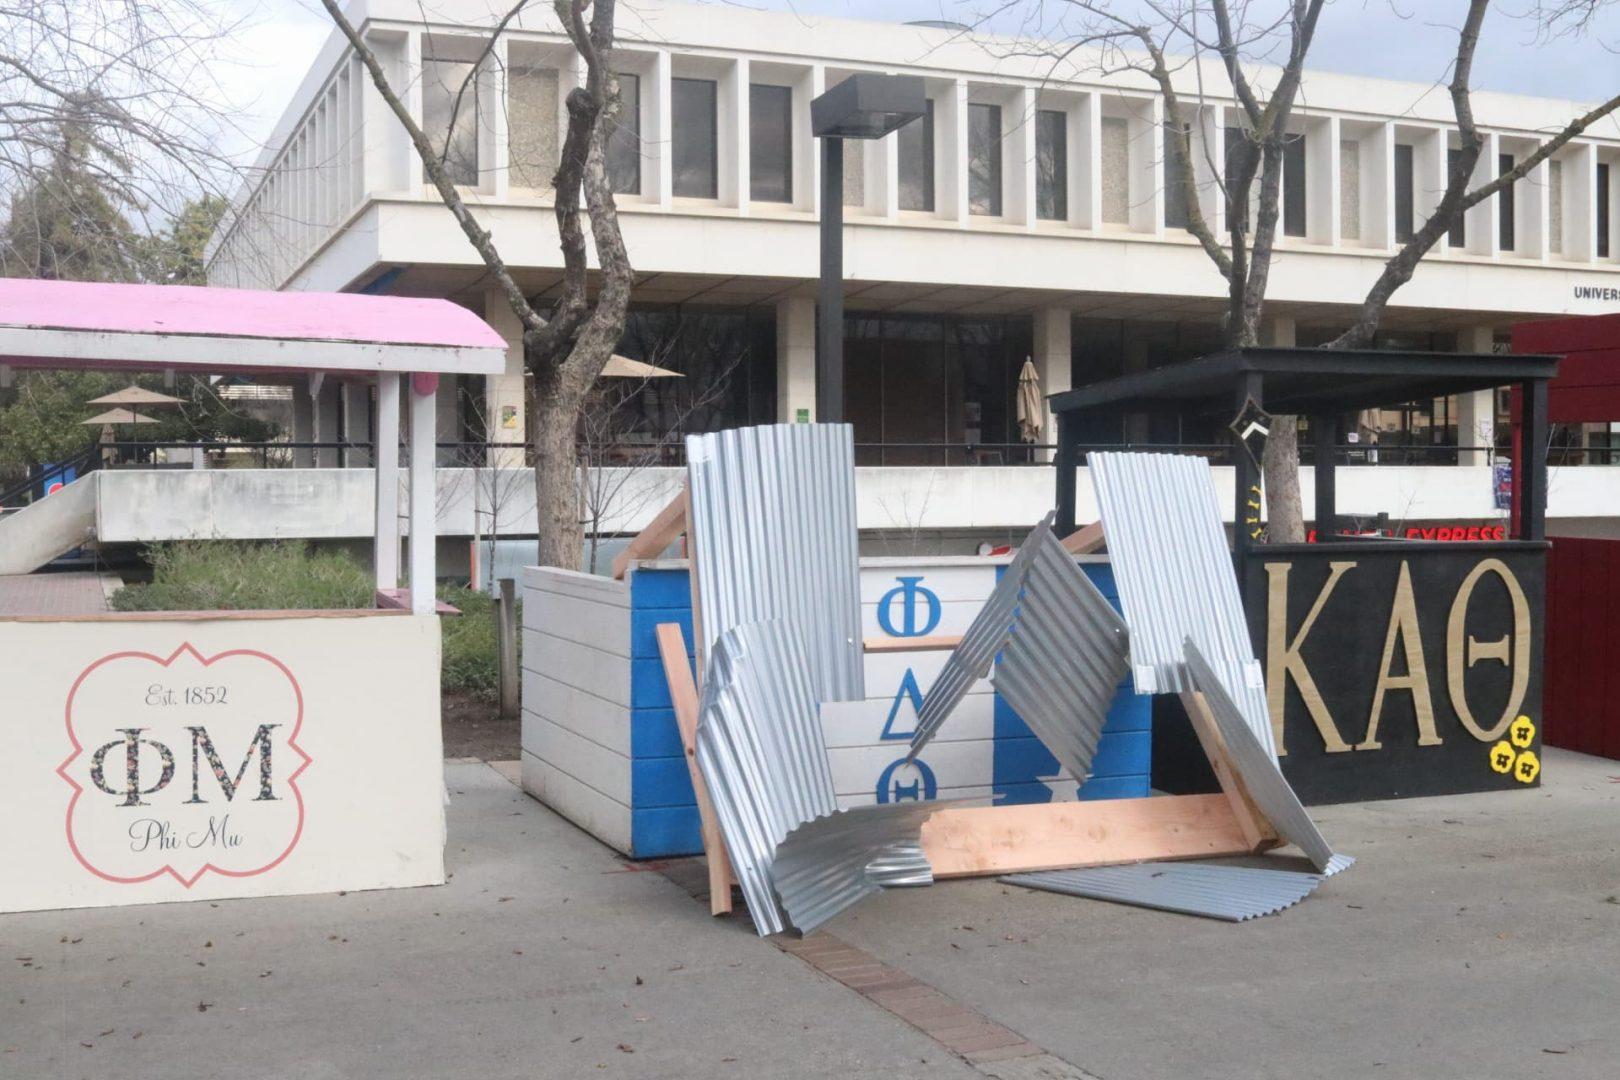 A thunderstorm struck the Fresno and Clovis area causing damage to two student organization booths on Sunday night. (Larry Valenzuela/ The Collegian)